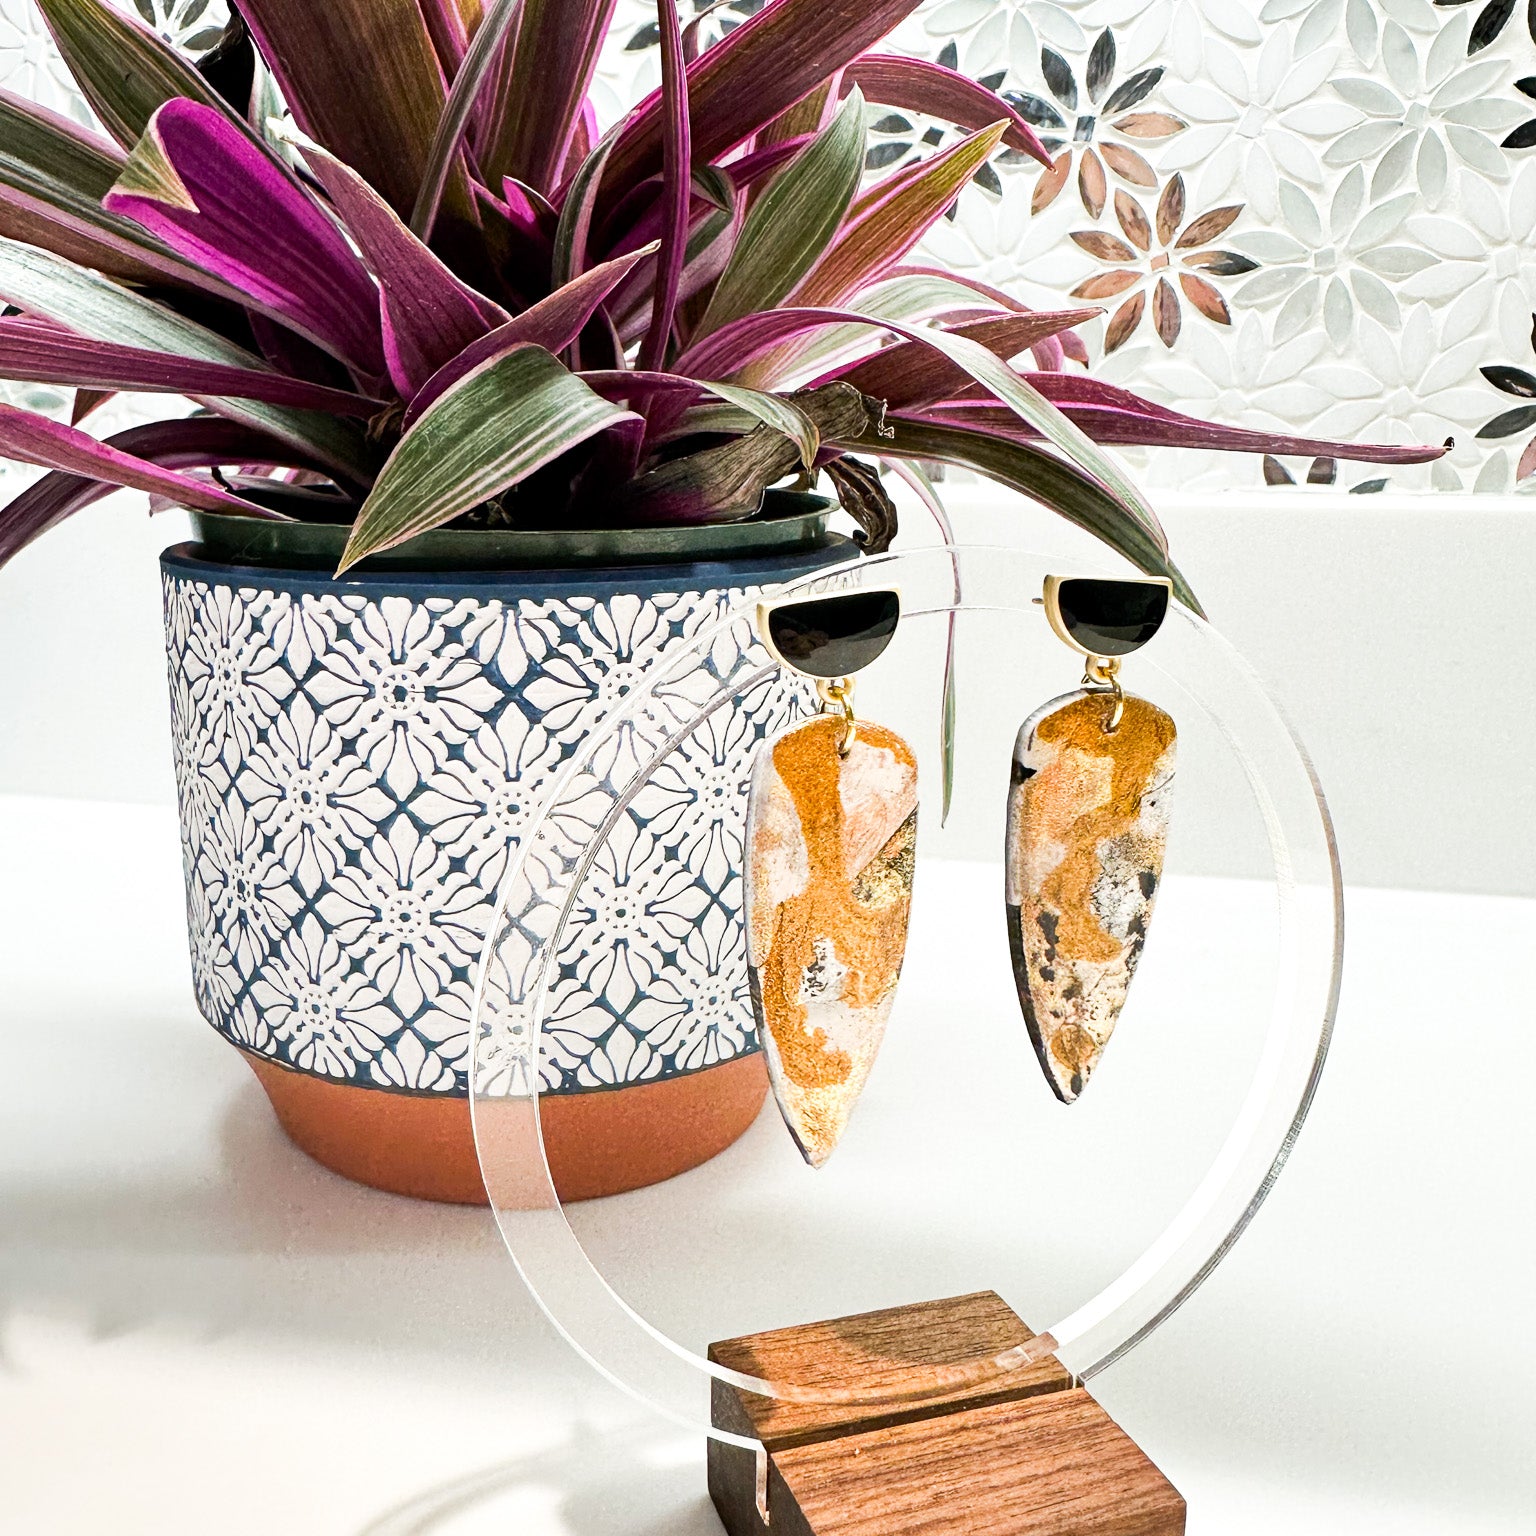 Elegant metallic polymer clay earrings with gold and black half moon accents dangle a clear circular display with a wooden block base, set against a mosaic backdrop with a rich purple-leafed plant in a blue and white patterned pot.